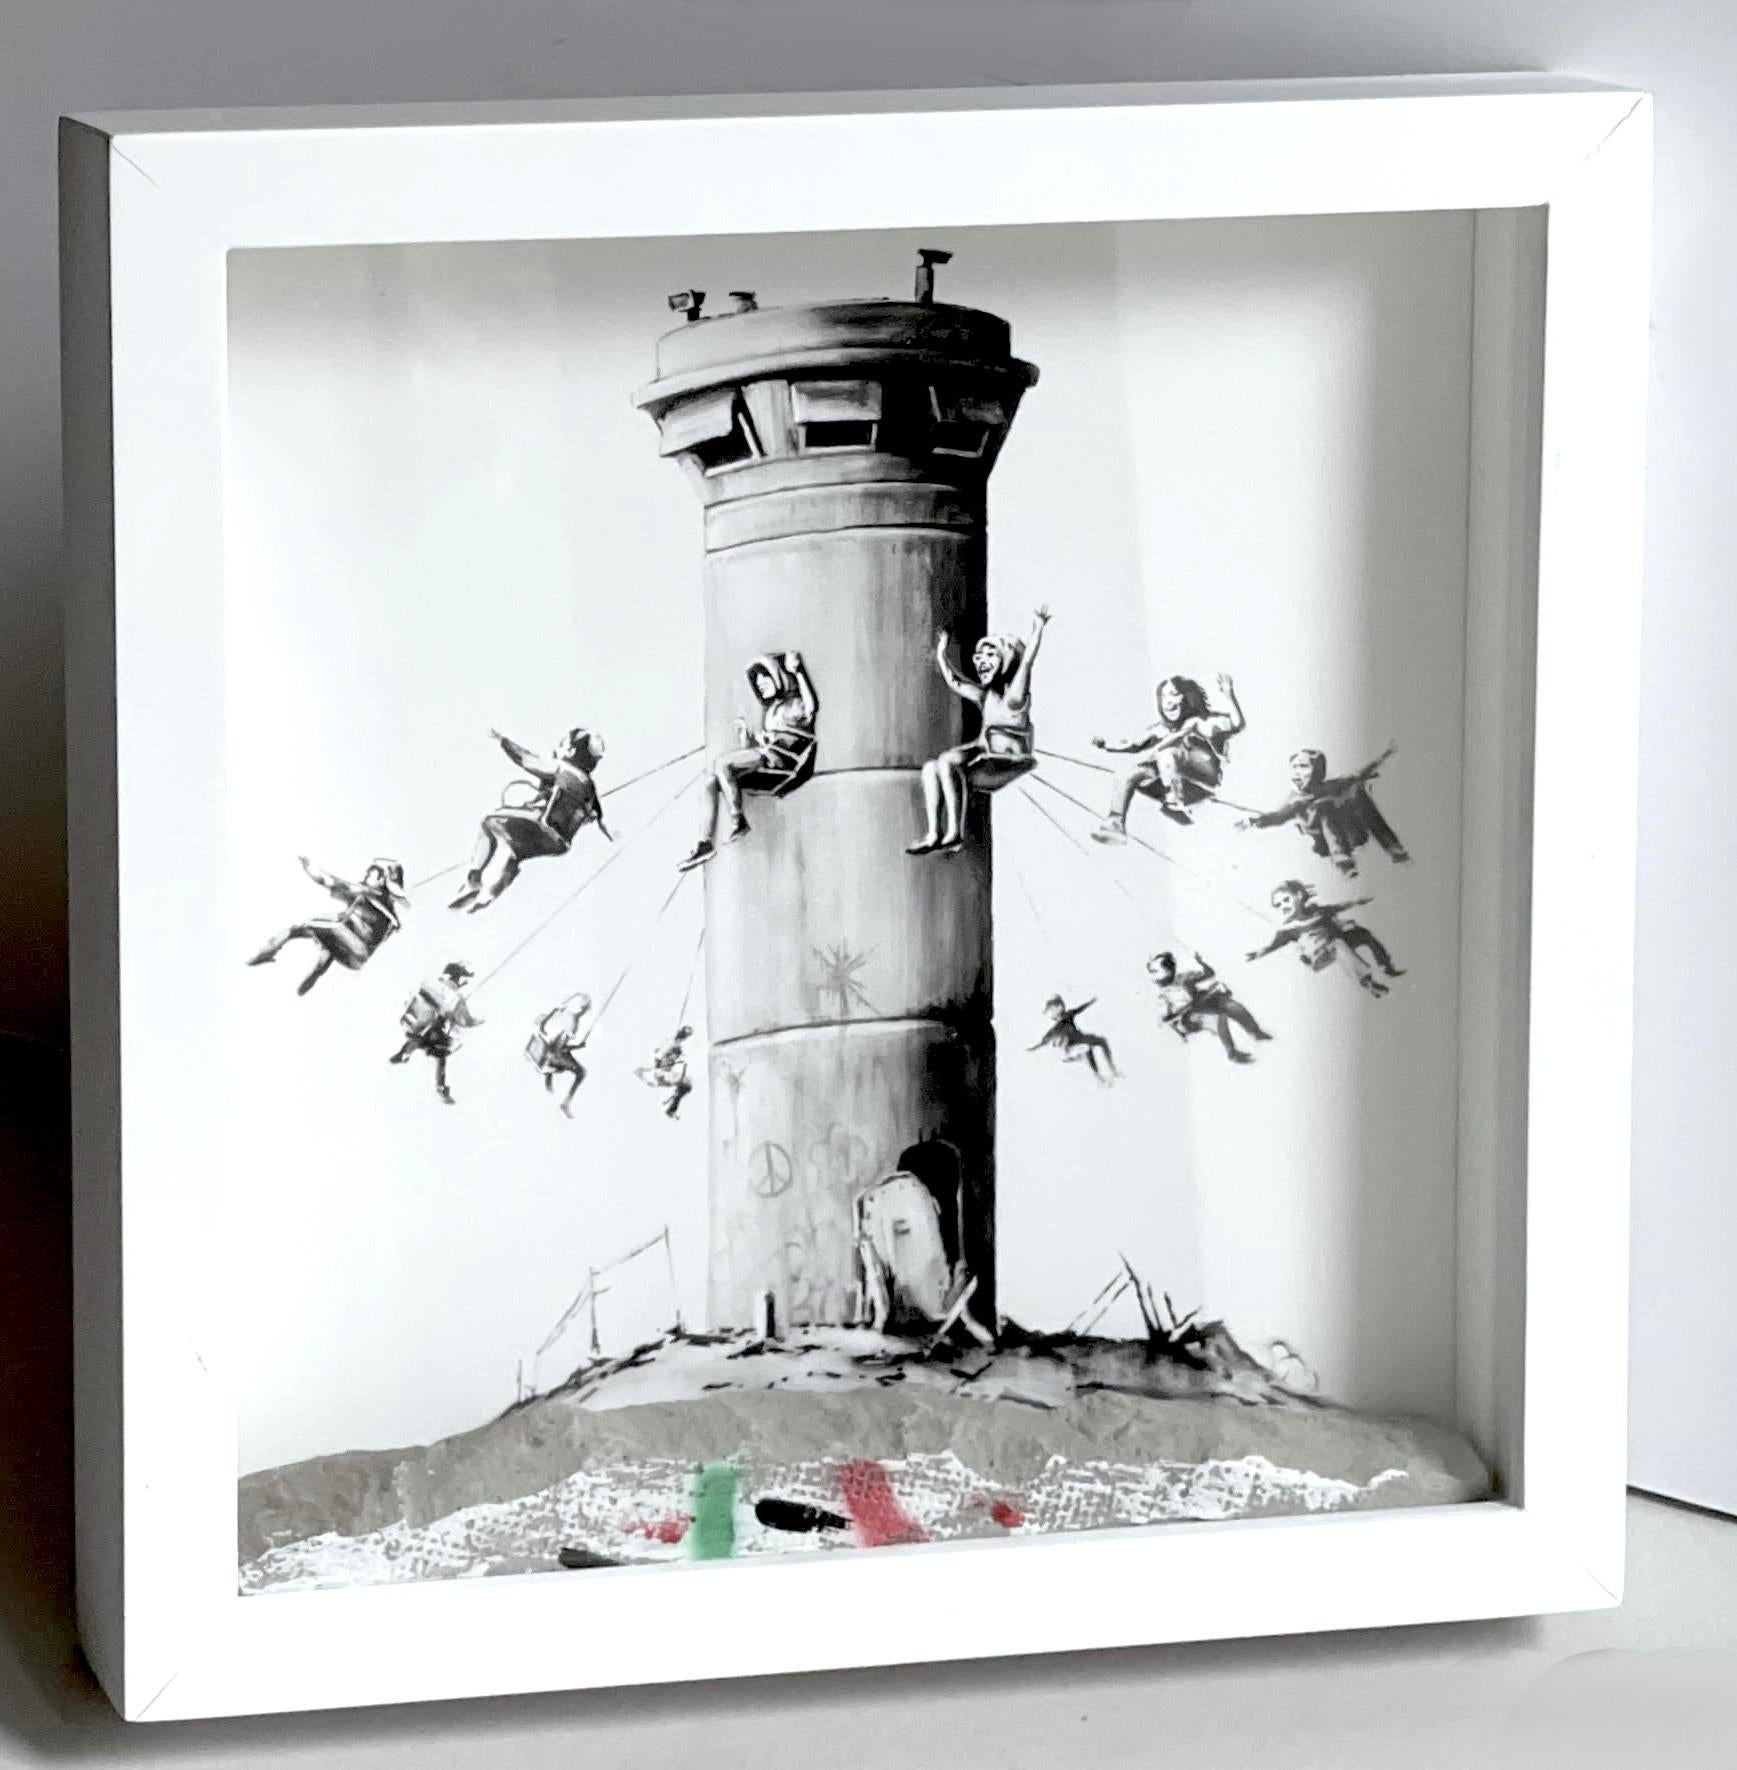 Banksy Figurative Sculpture - Walled Off Hotel Boxed Set Assemblage, embossed receipt from West Bank Palestine